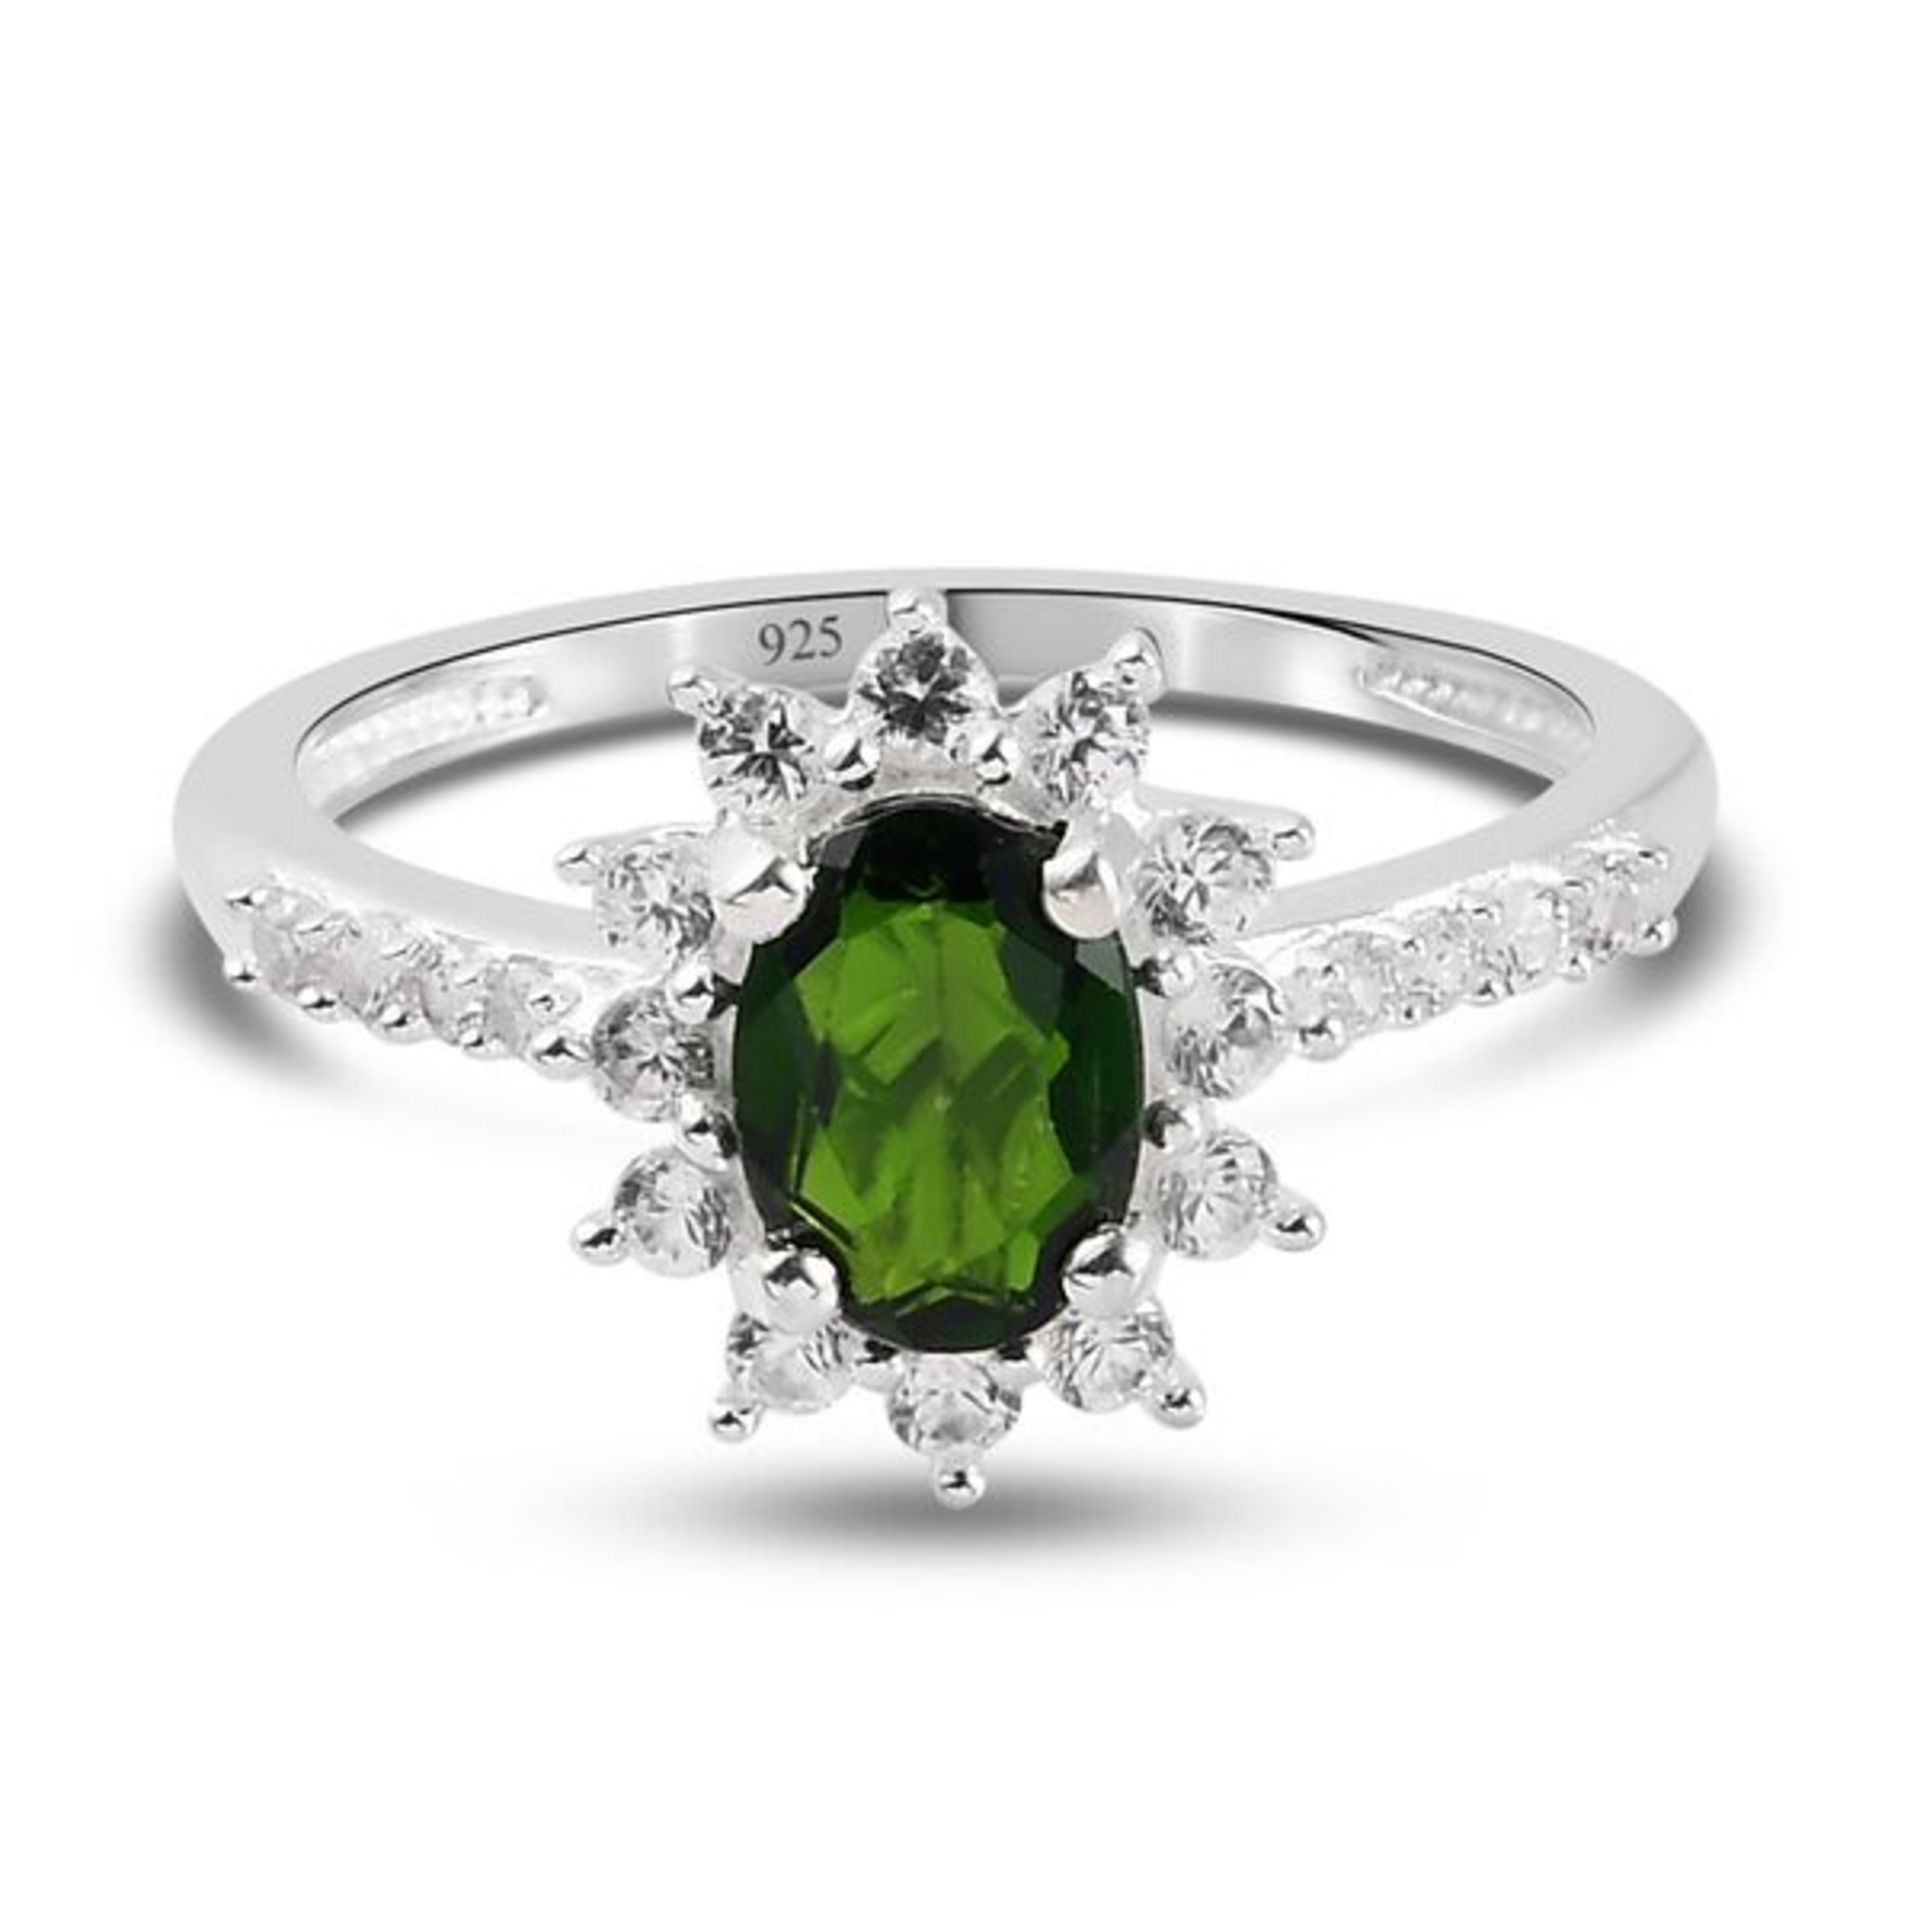 NEW!! Sterling Silver Diopside and Natural Cambodian Zircon Ring & Earrings - Image 2 of 6